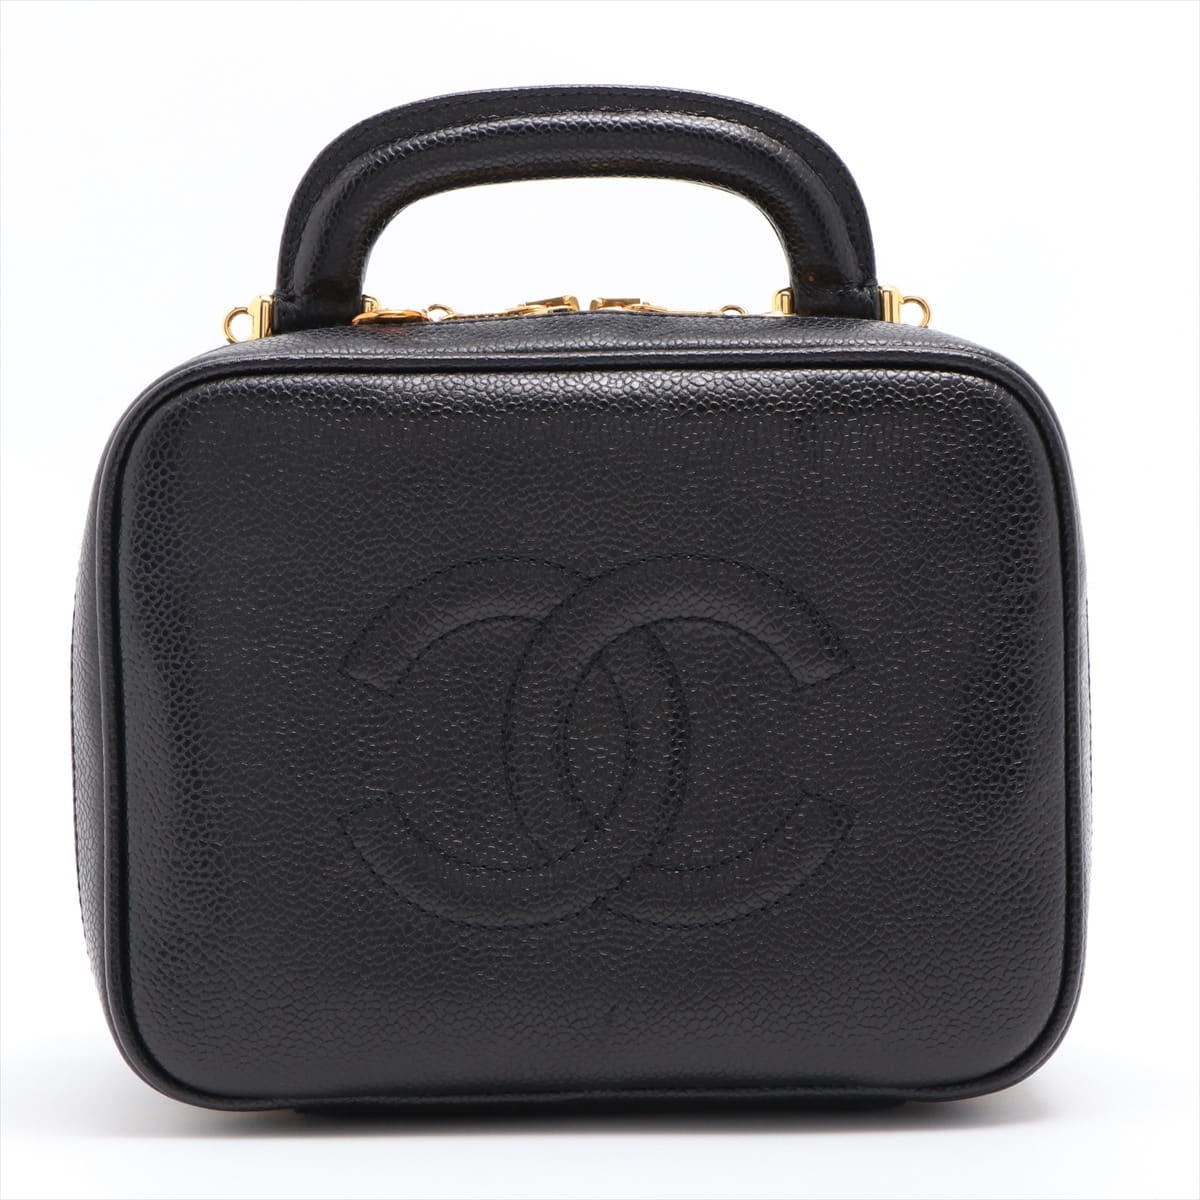 Chanel Coco Mark Caviarskin Vanity bag 2WAY Black Gold Metal fittings 4XXXXXX Comes with case